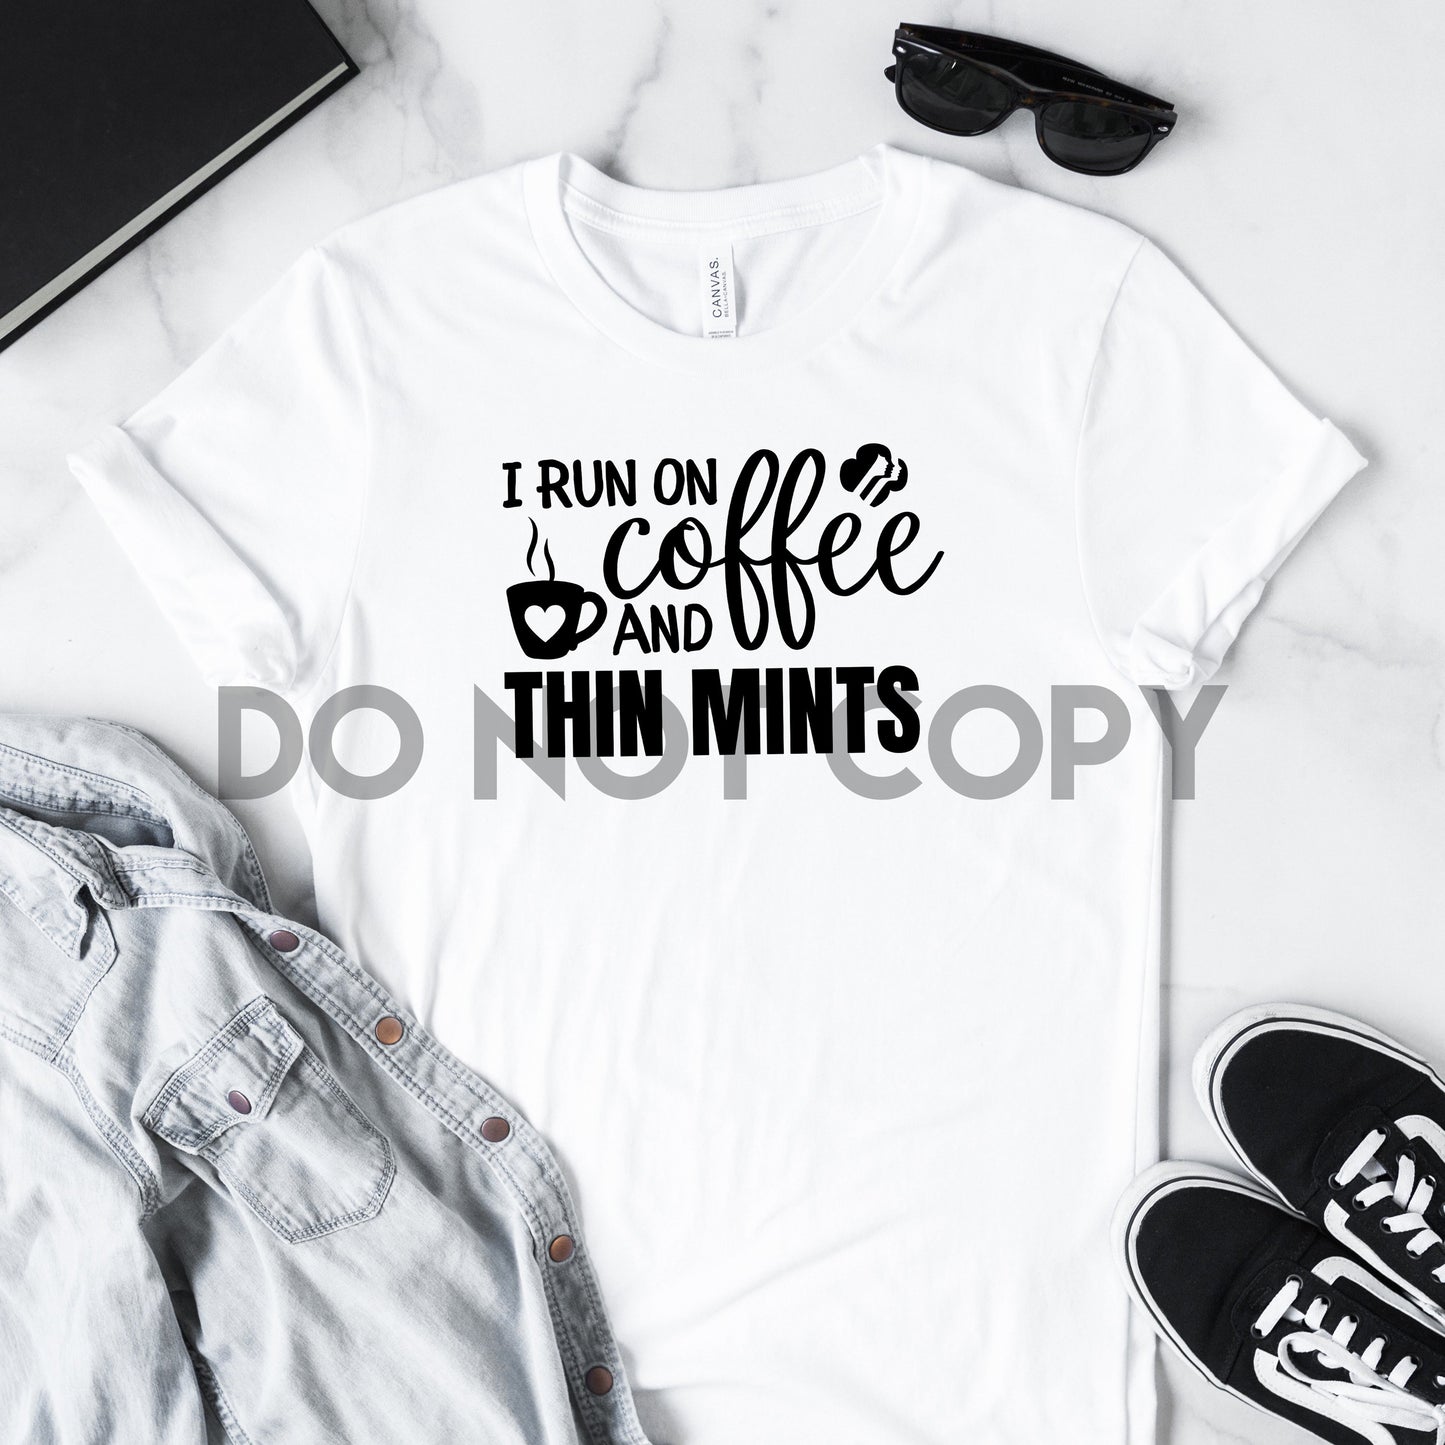 I Run on Coffee and mint cookies Sublimation Print